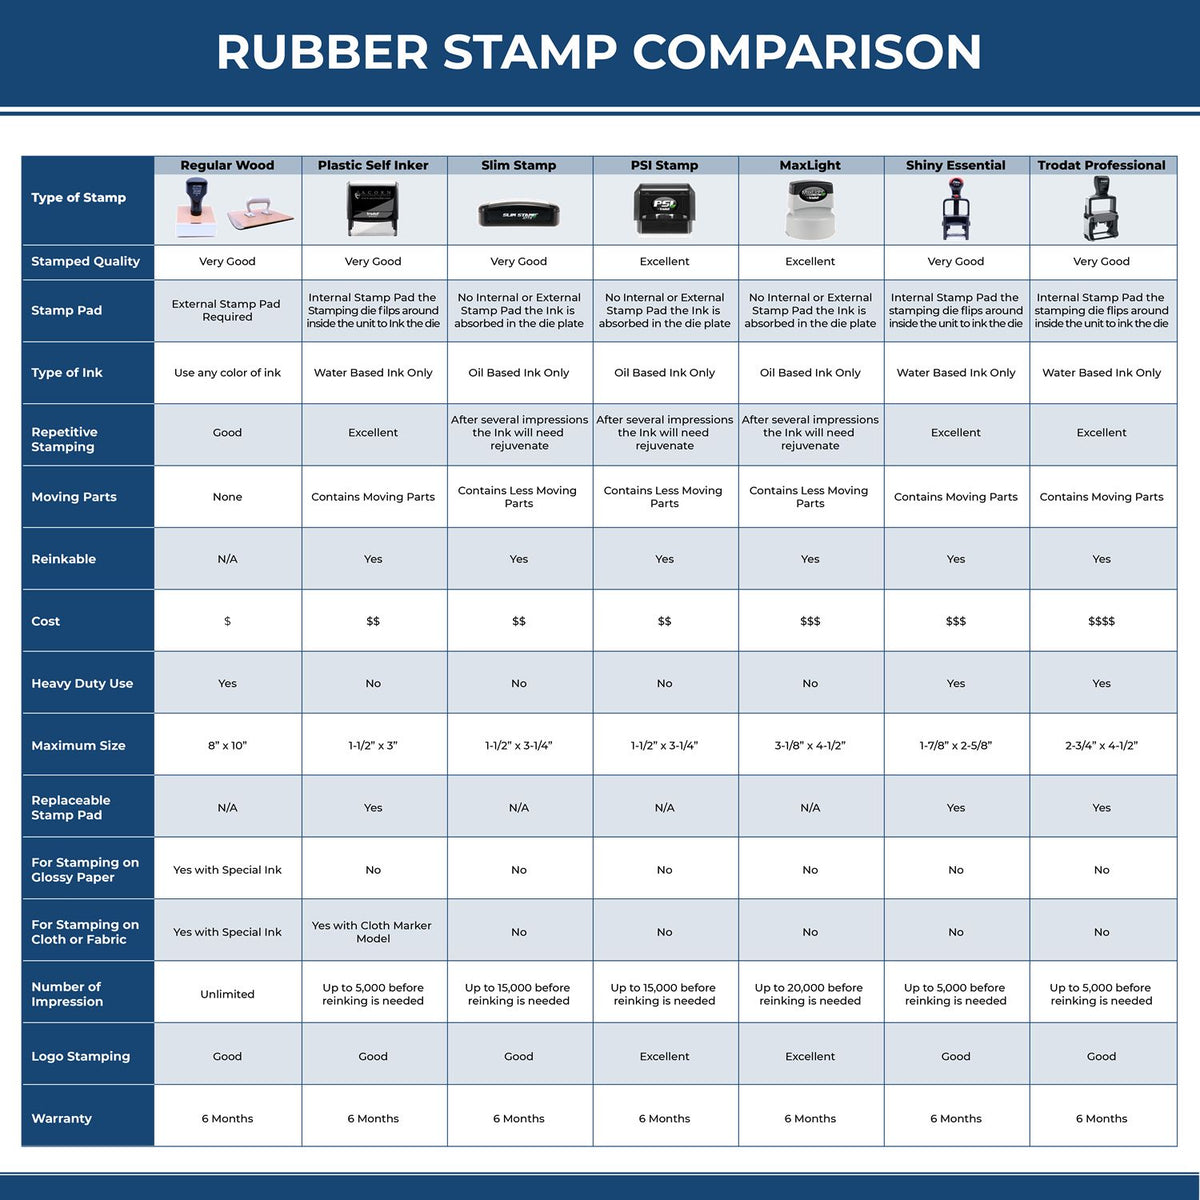 A comparison chart for the different types of mount models available for the Pennsylvania Professional Engineer Seal Stamp.